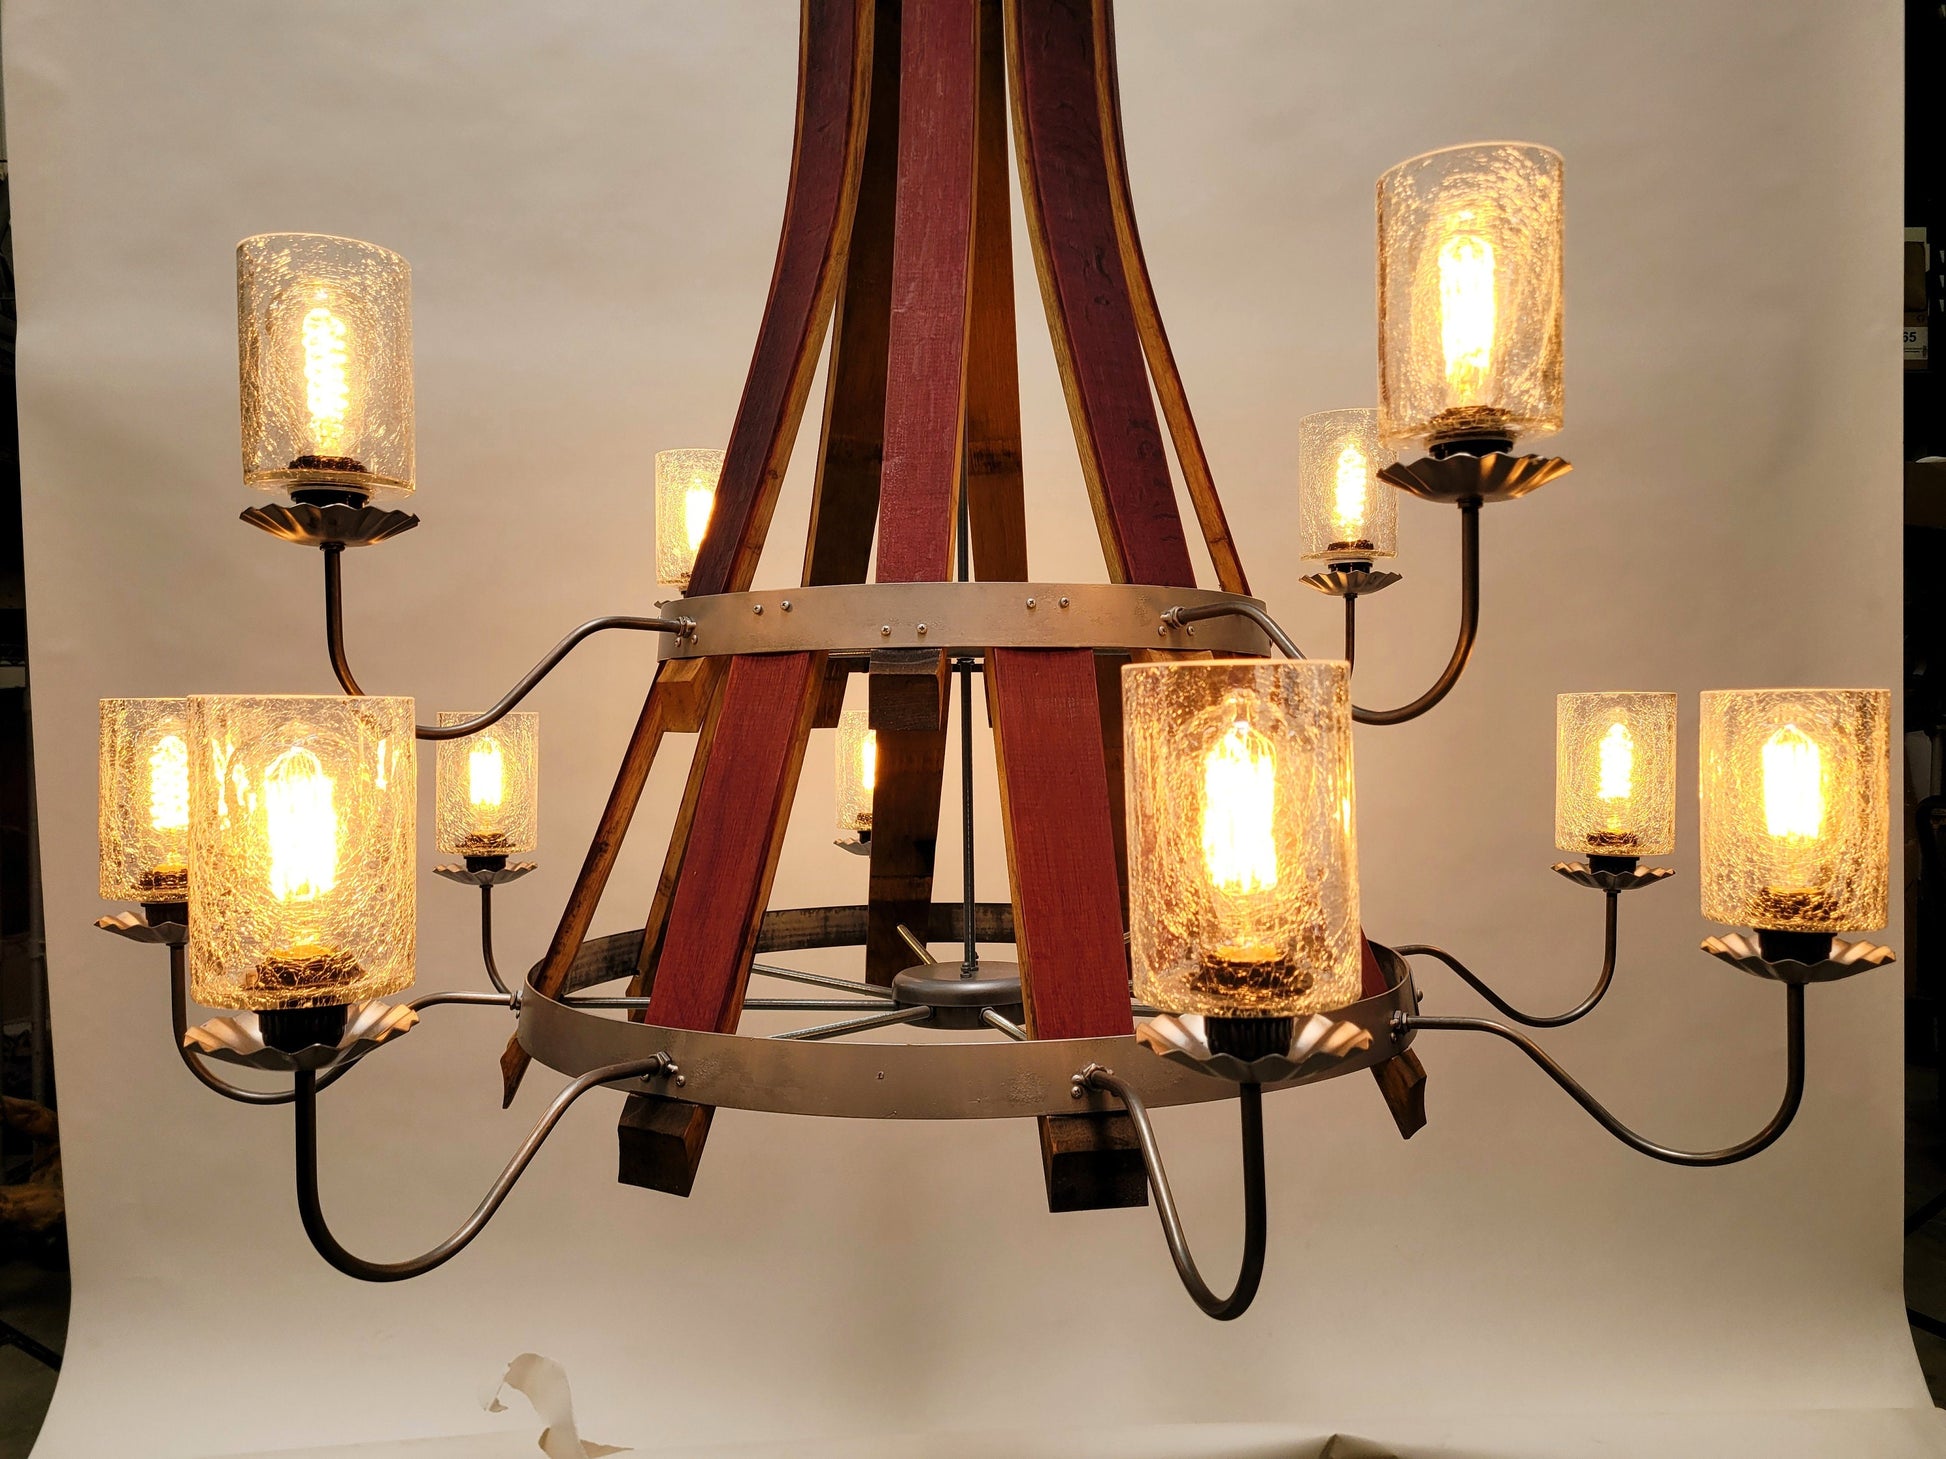 Wine Barrel Basket Chandelier - PAPALUA - Made from retired California wine barrels 100% Recycled!